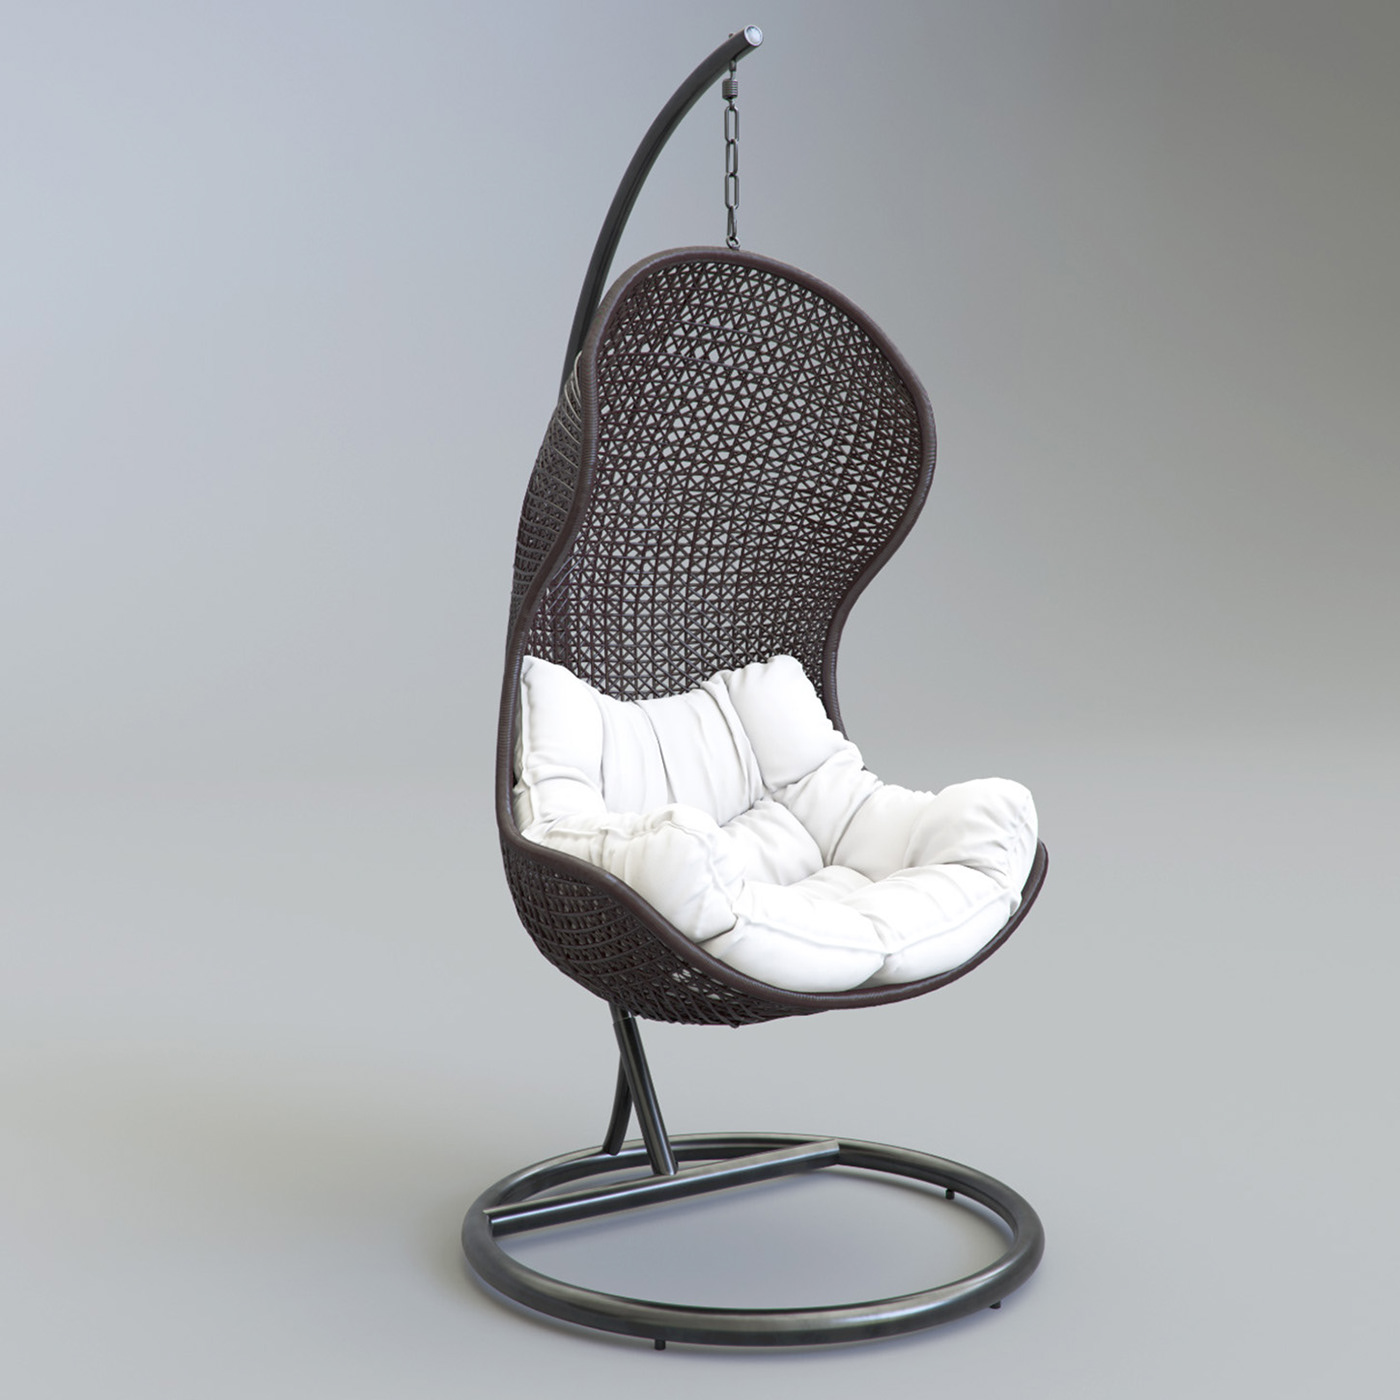 3D 3d max chair Chair Model 3D model paralay free download 3ds max download 3ds max interior design 